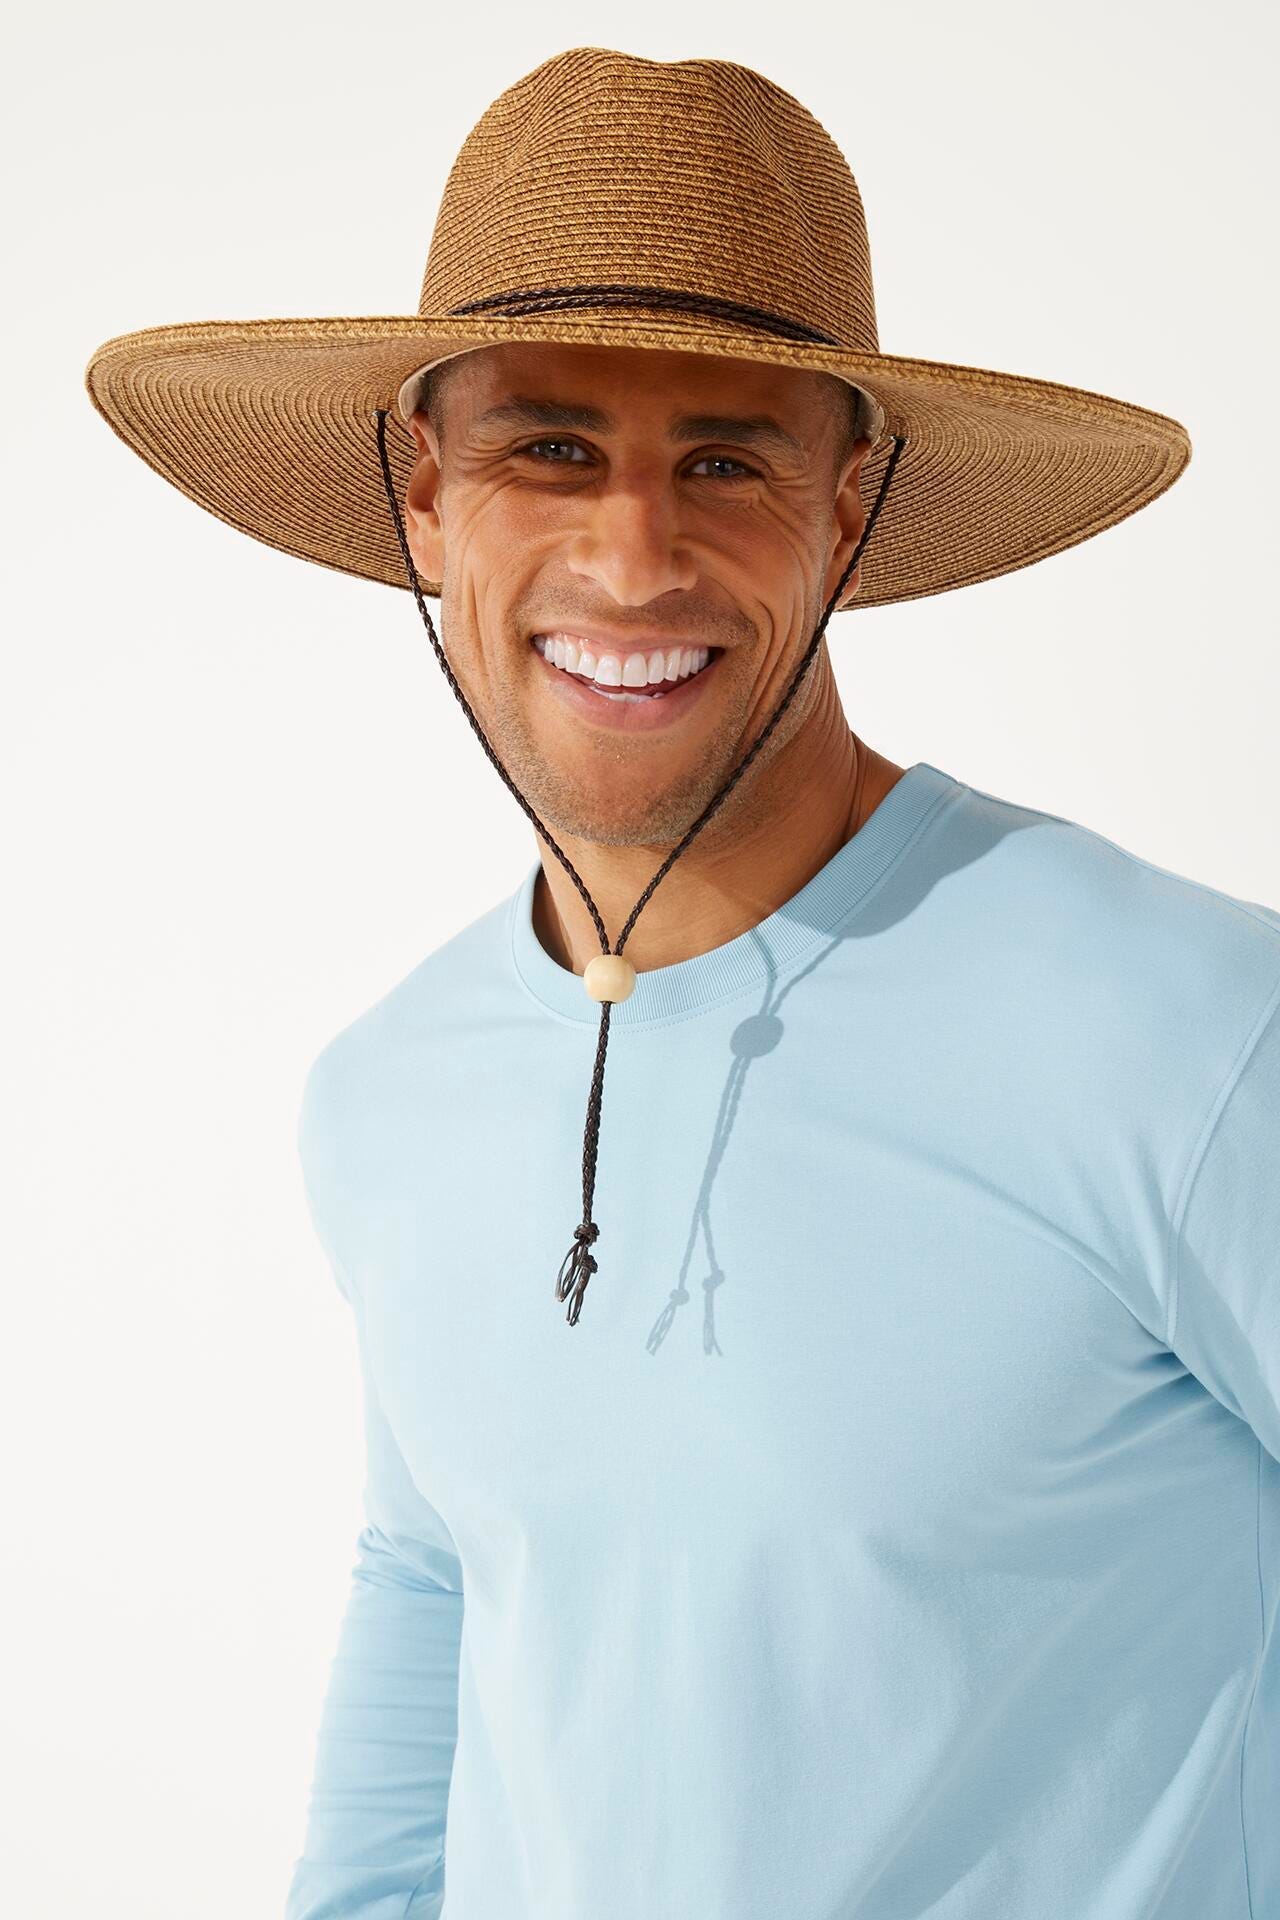 CAMOLAND Mens Sun Protection Hat  Sun protection hat, Beach day outfits,  Surf hats